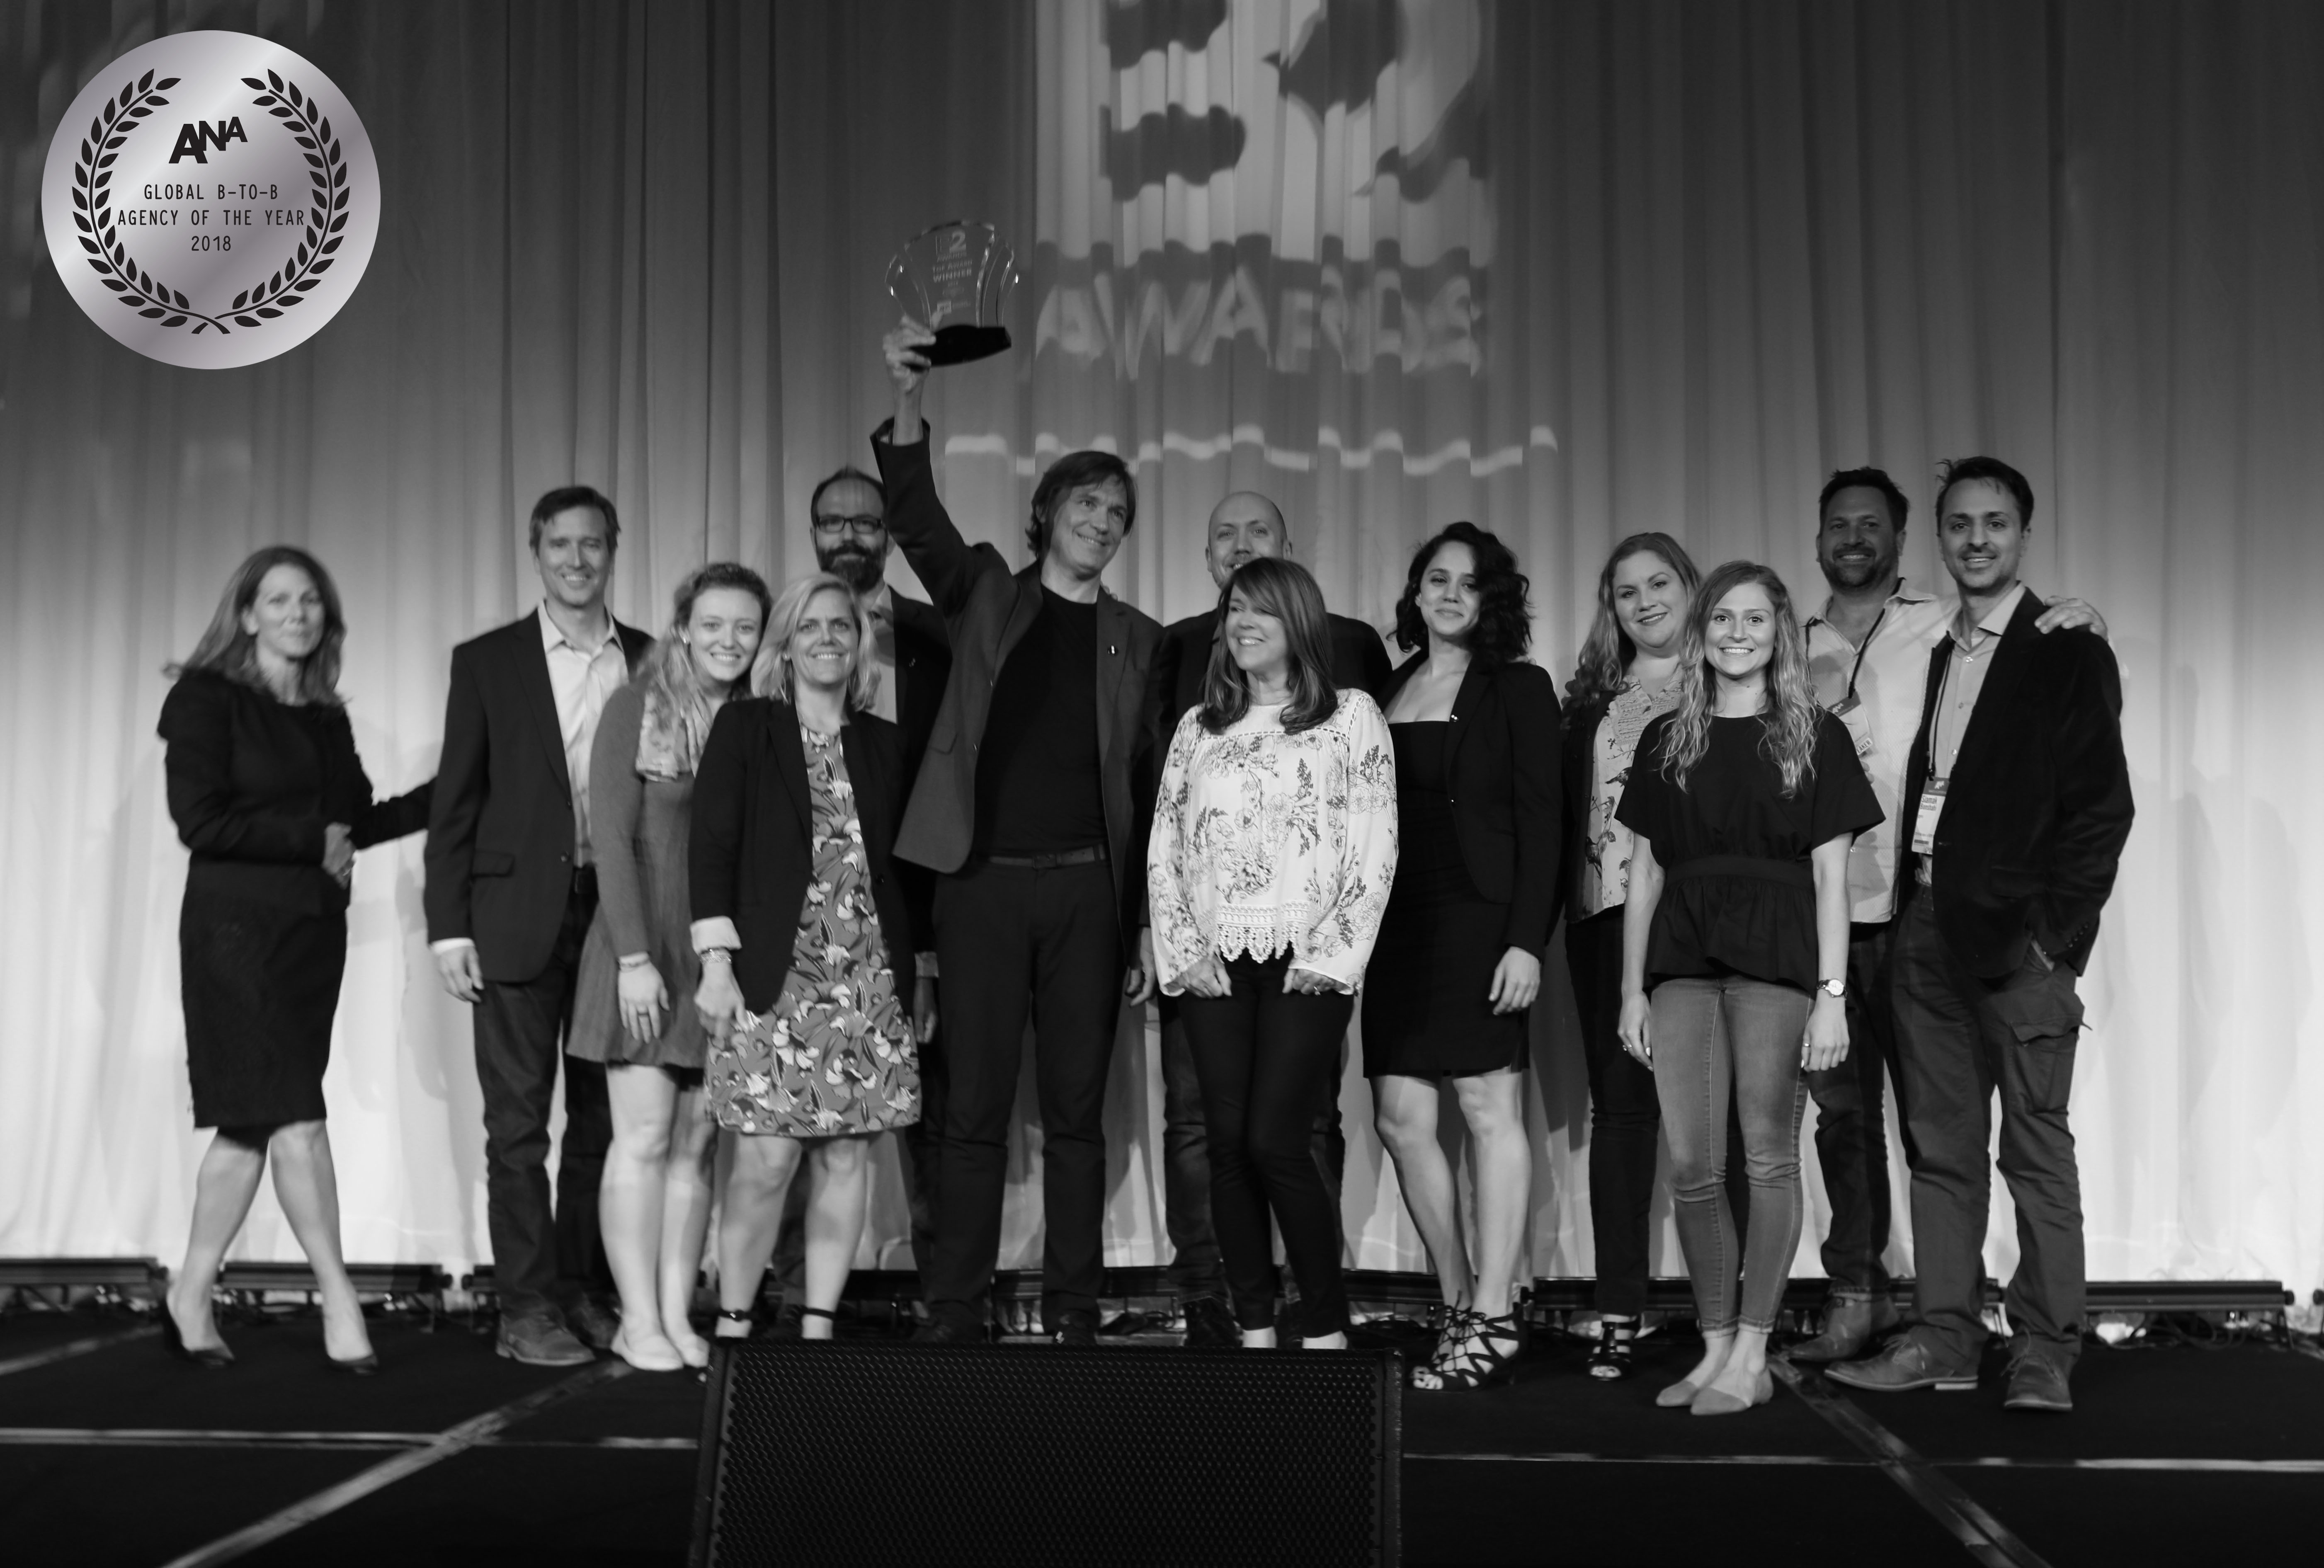 gyro has been named the 2018 Global B2B Agency of the Year by the Association of National Advertisers (ANA)